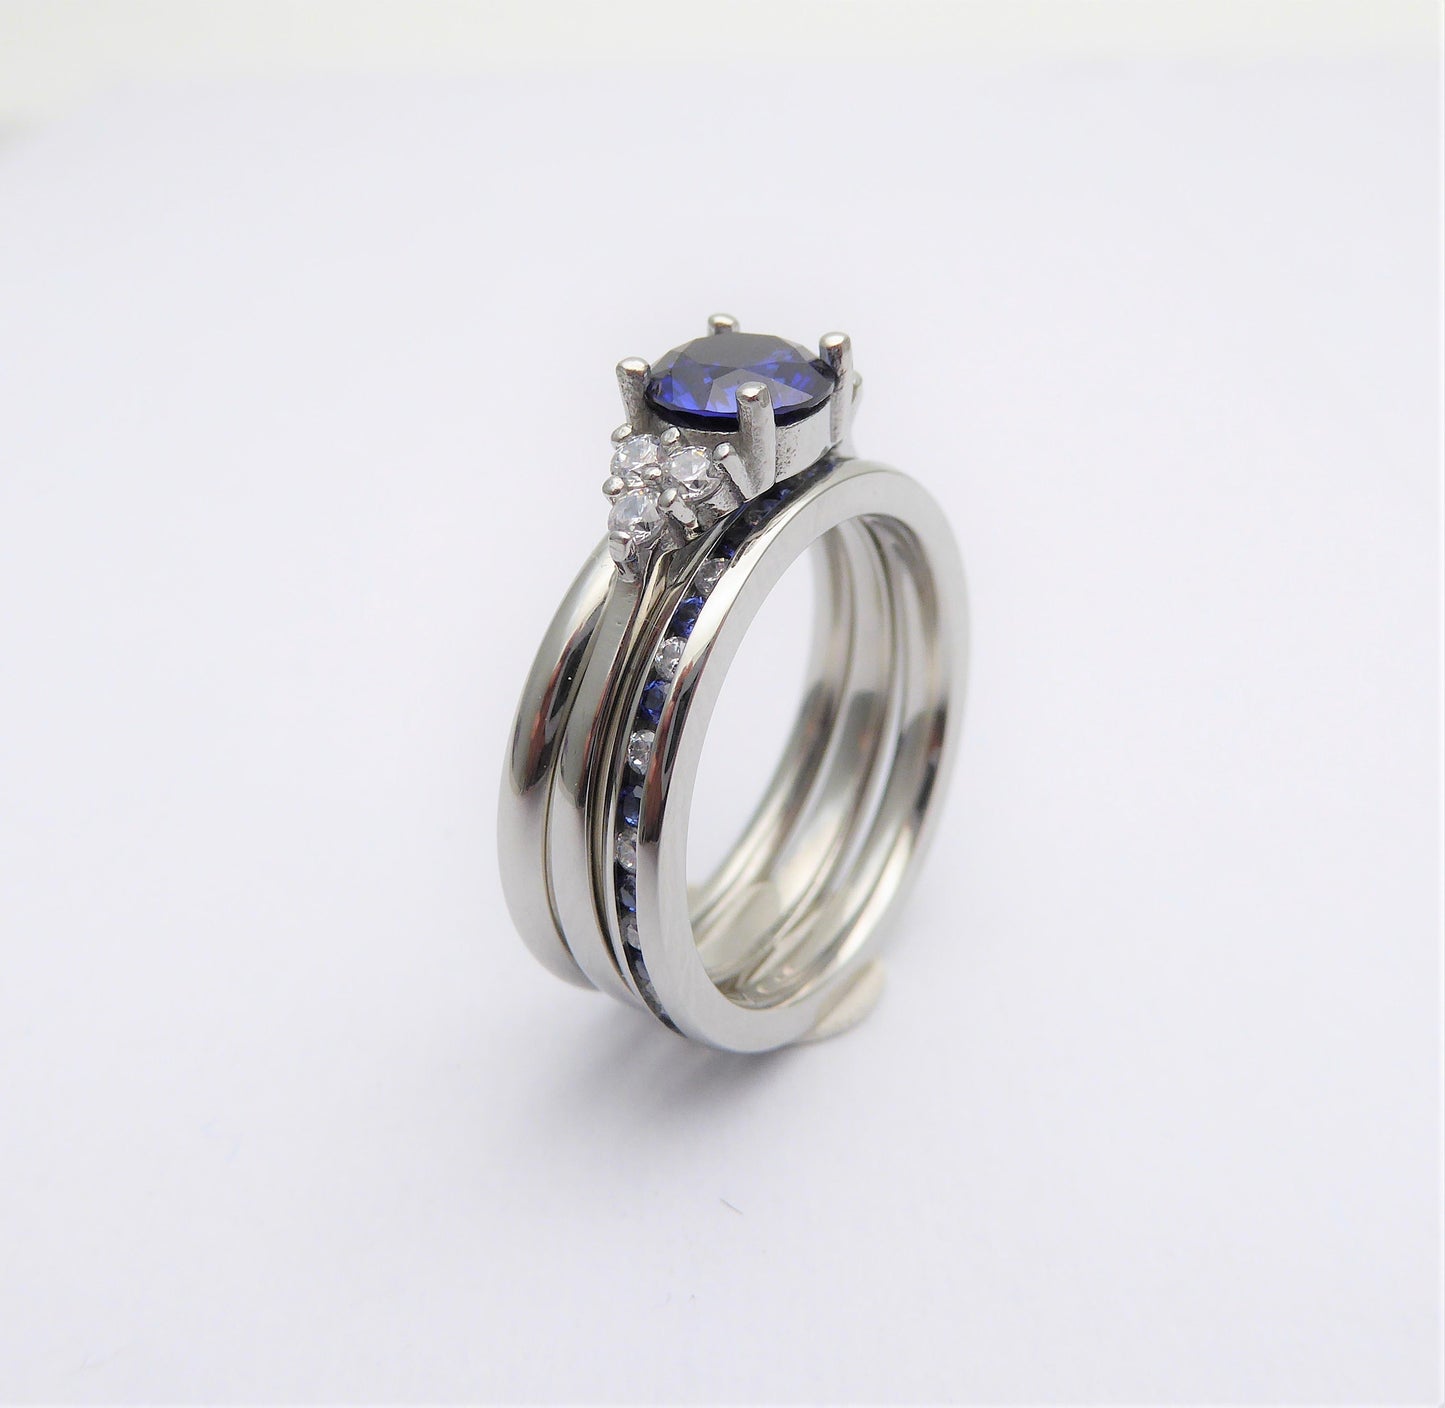 Wedding set! Blue Saphire engagment ring and matching eternity & Wedding ring in Titanium or White Gold